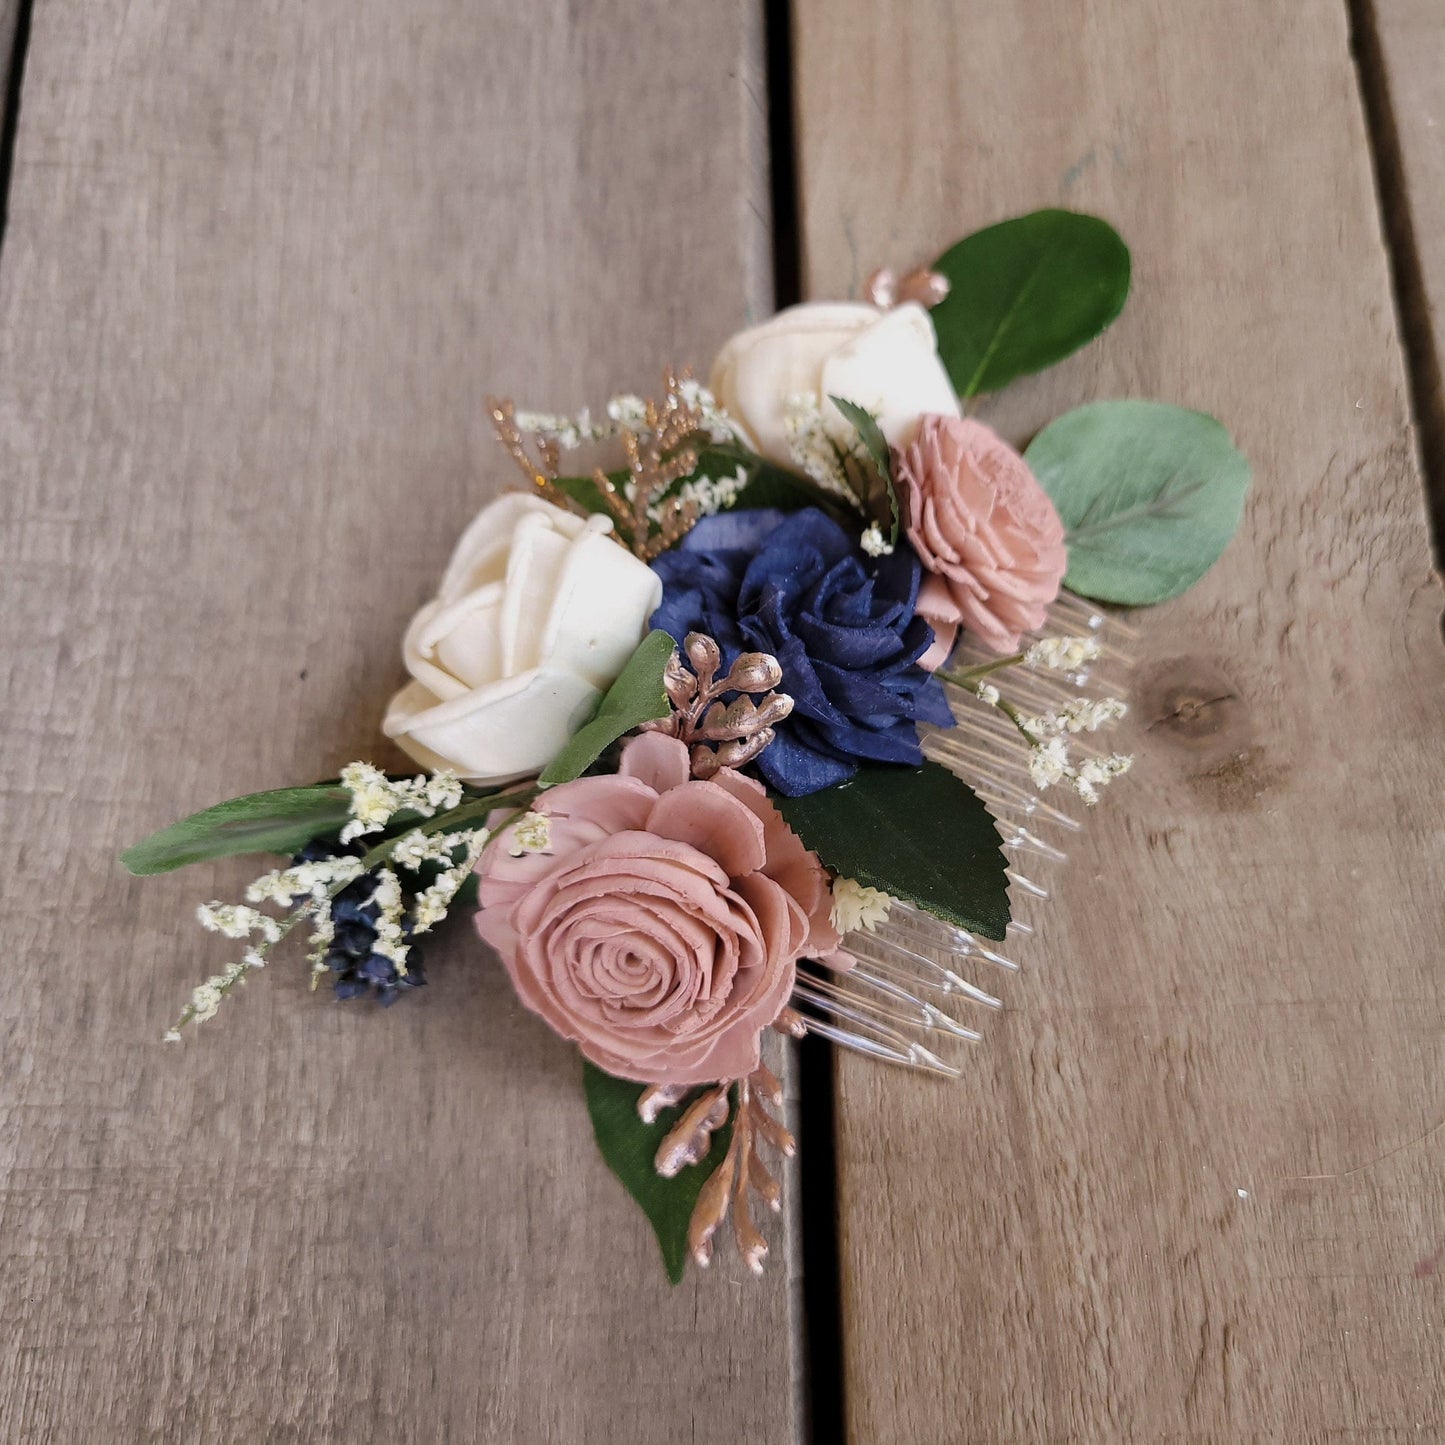 Bridal Hair Comb for Wedding Updo, Sola Wood Flowers Hair Piece, Navy and Blush Wedding Flowers